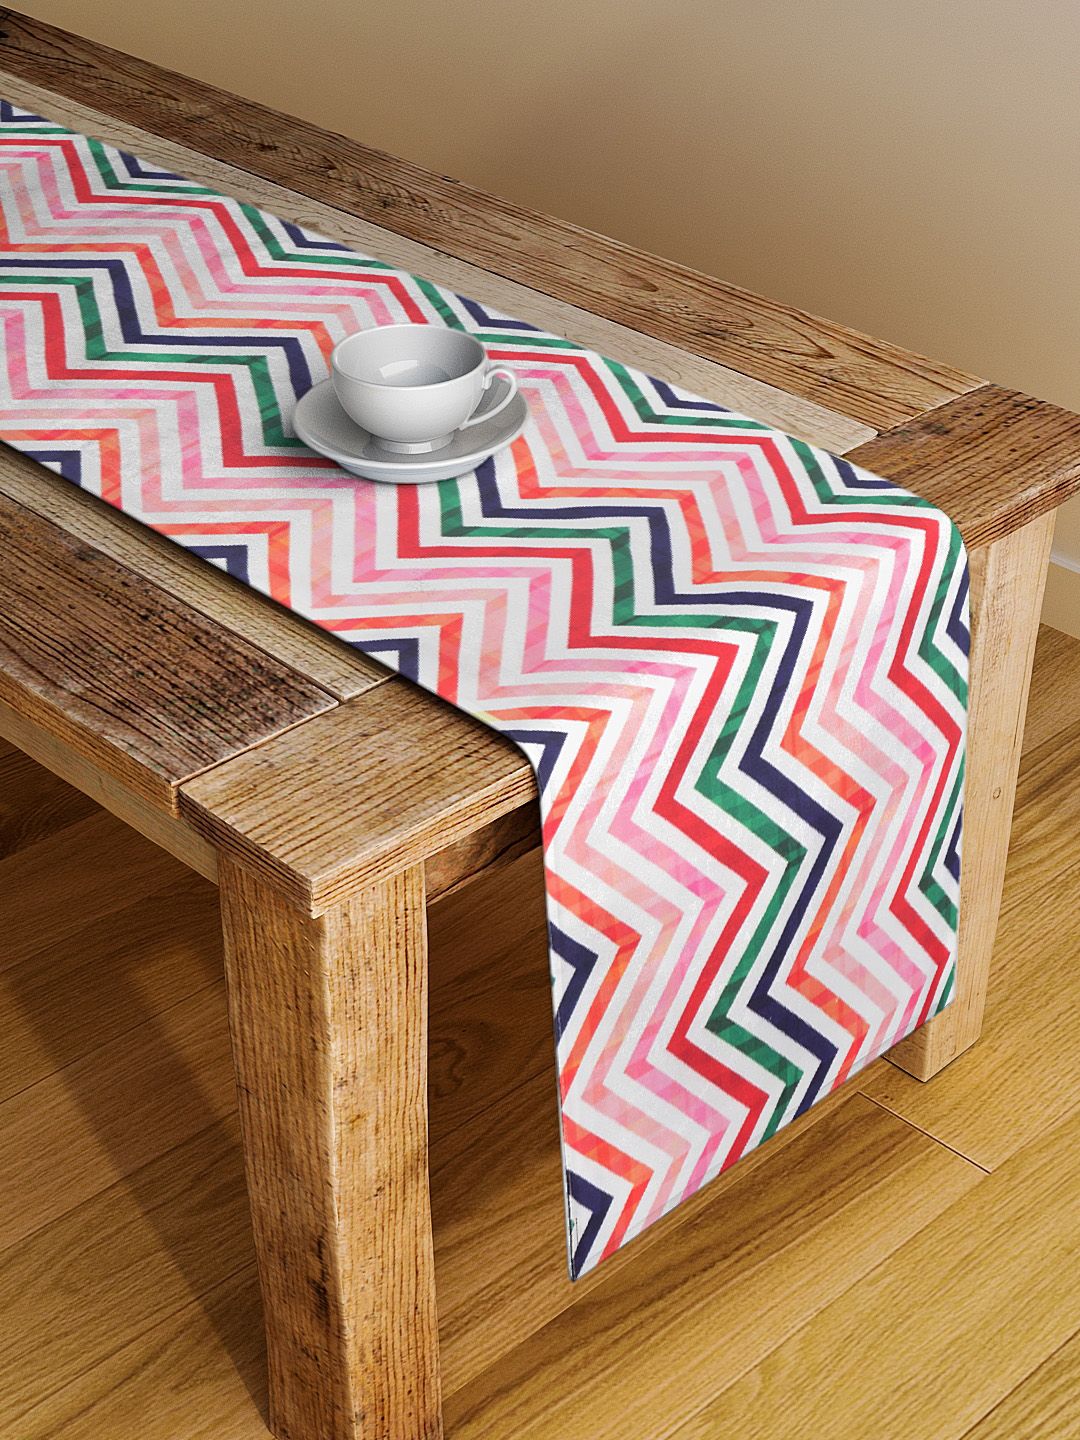 Alina decor White & Red Geometric Digital Printed Table Runner Price in India